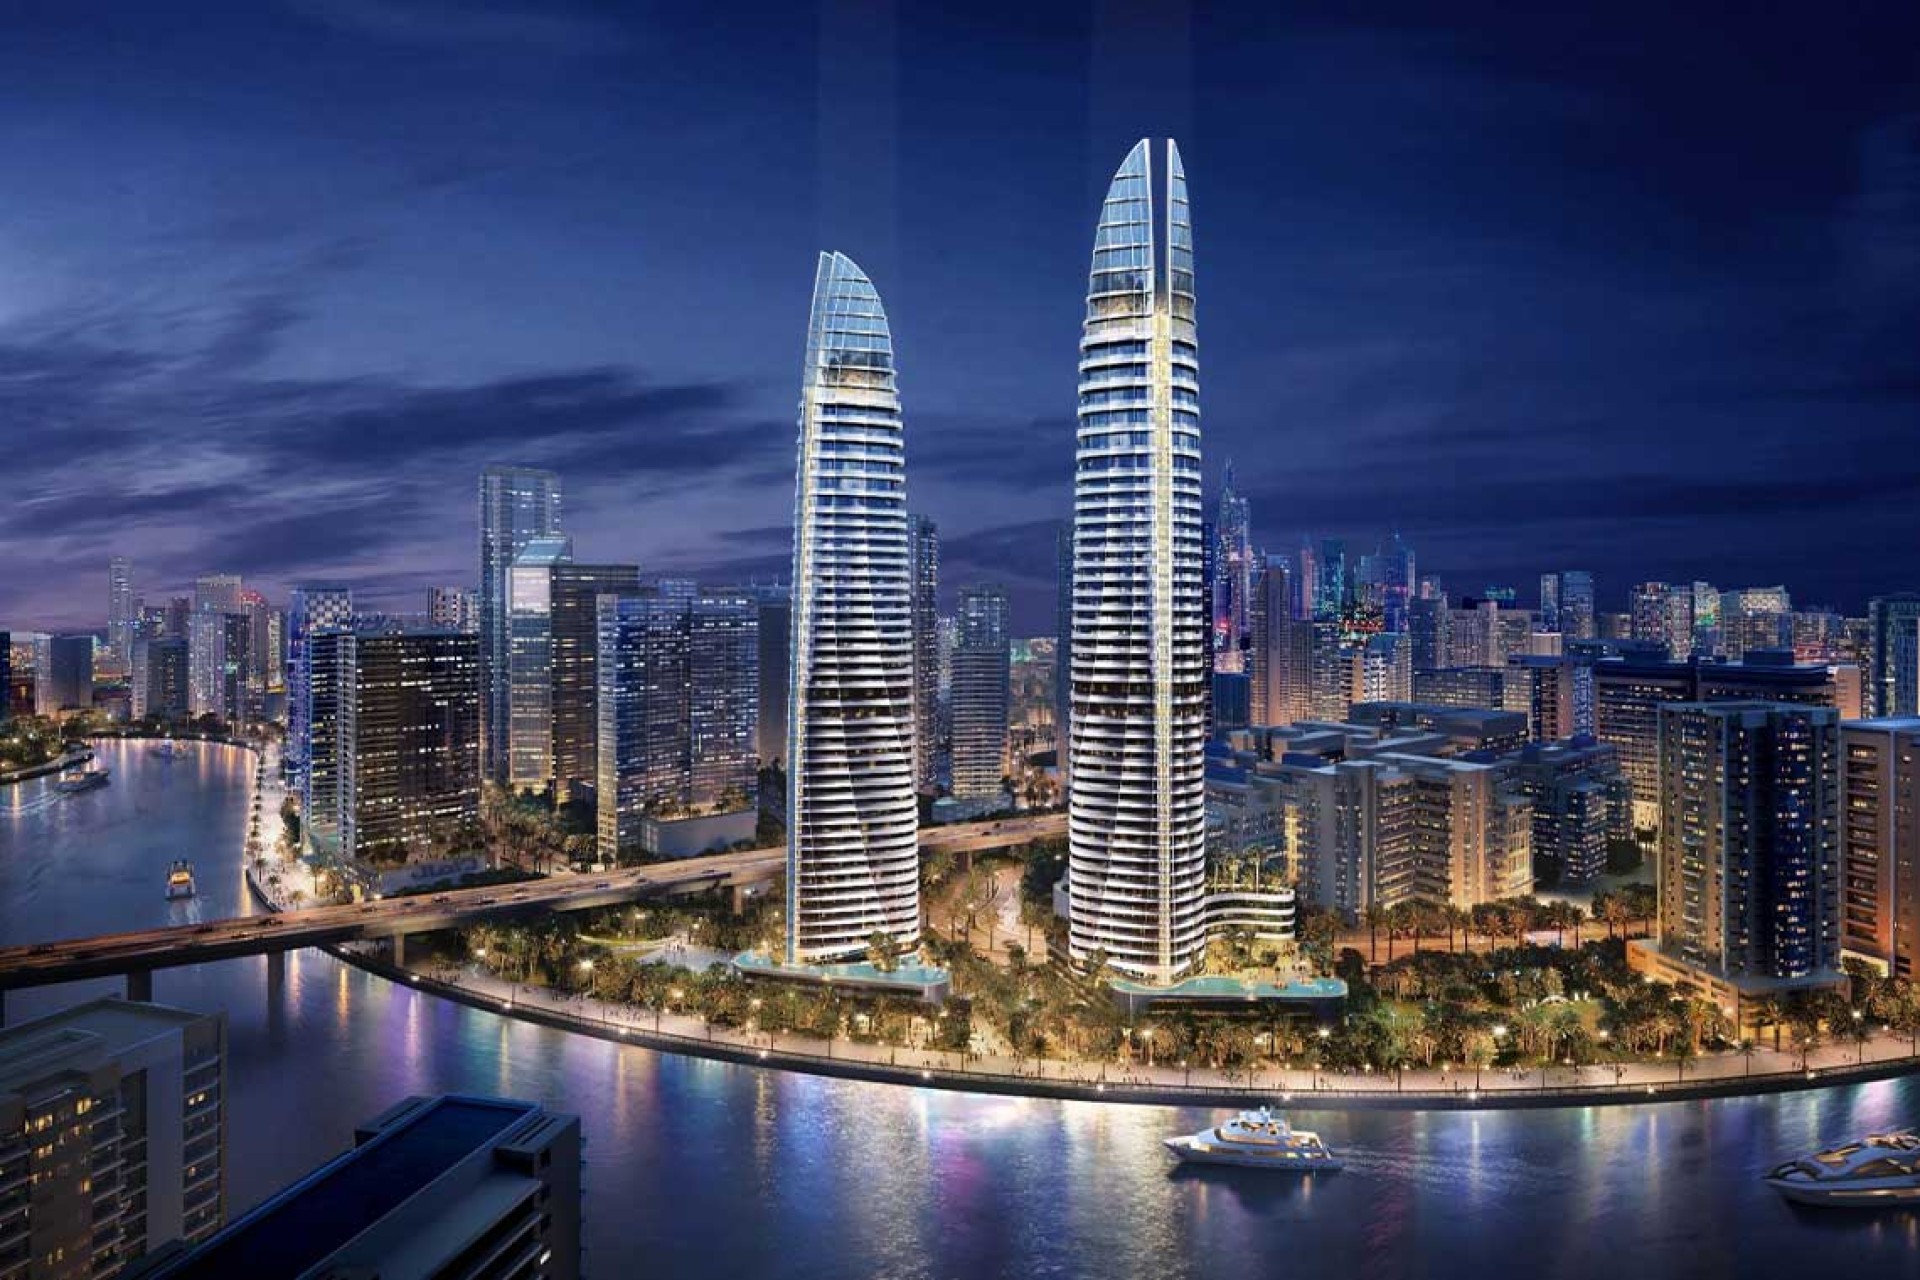  New rise of luxury development by Damac Properties at Business Bay